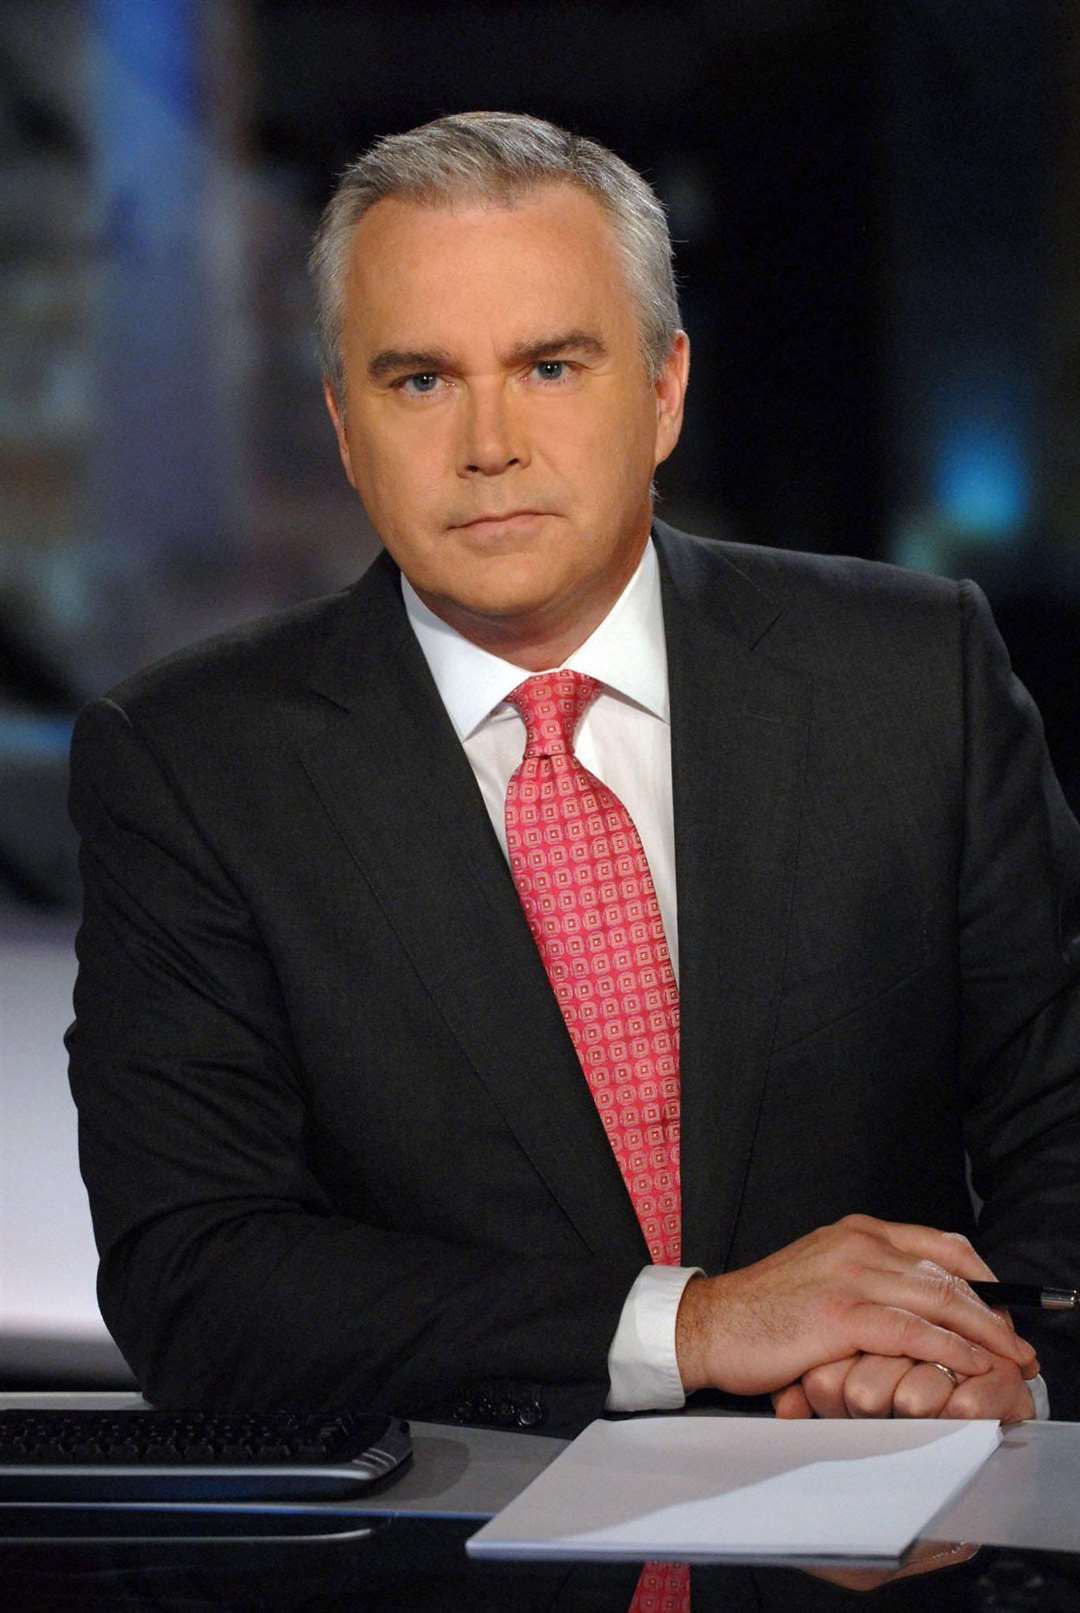 Huw Edwards anchored coverage of many royal events (BBC/PA)